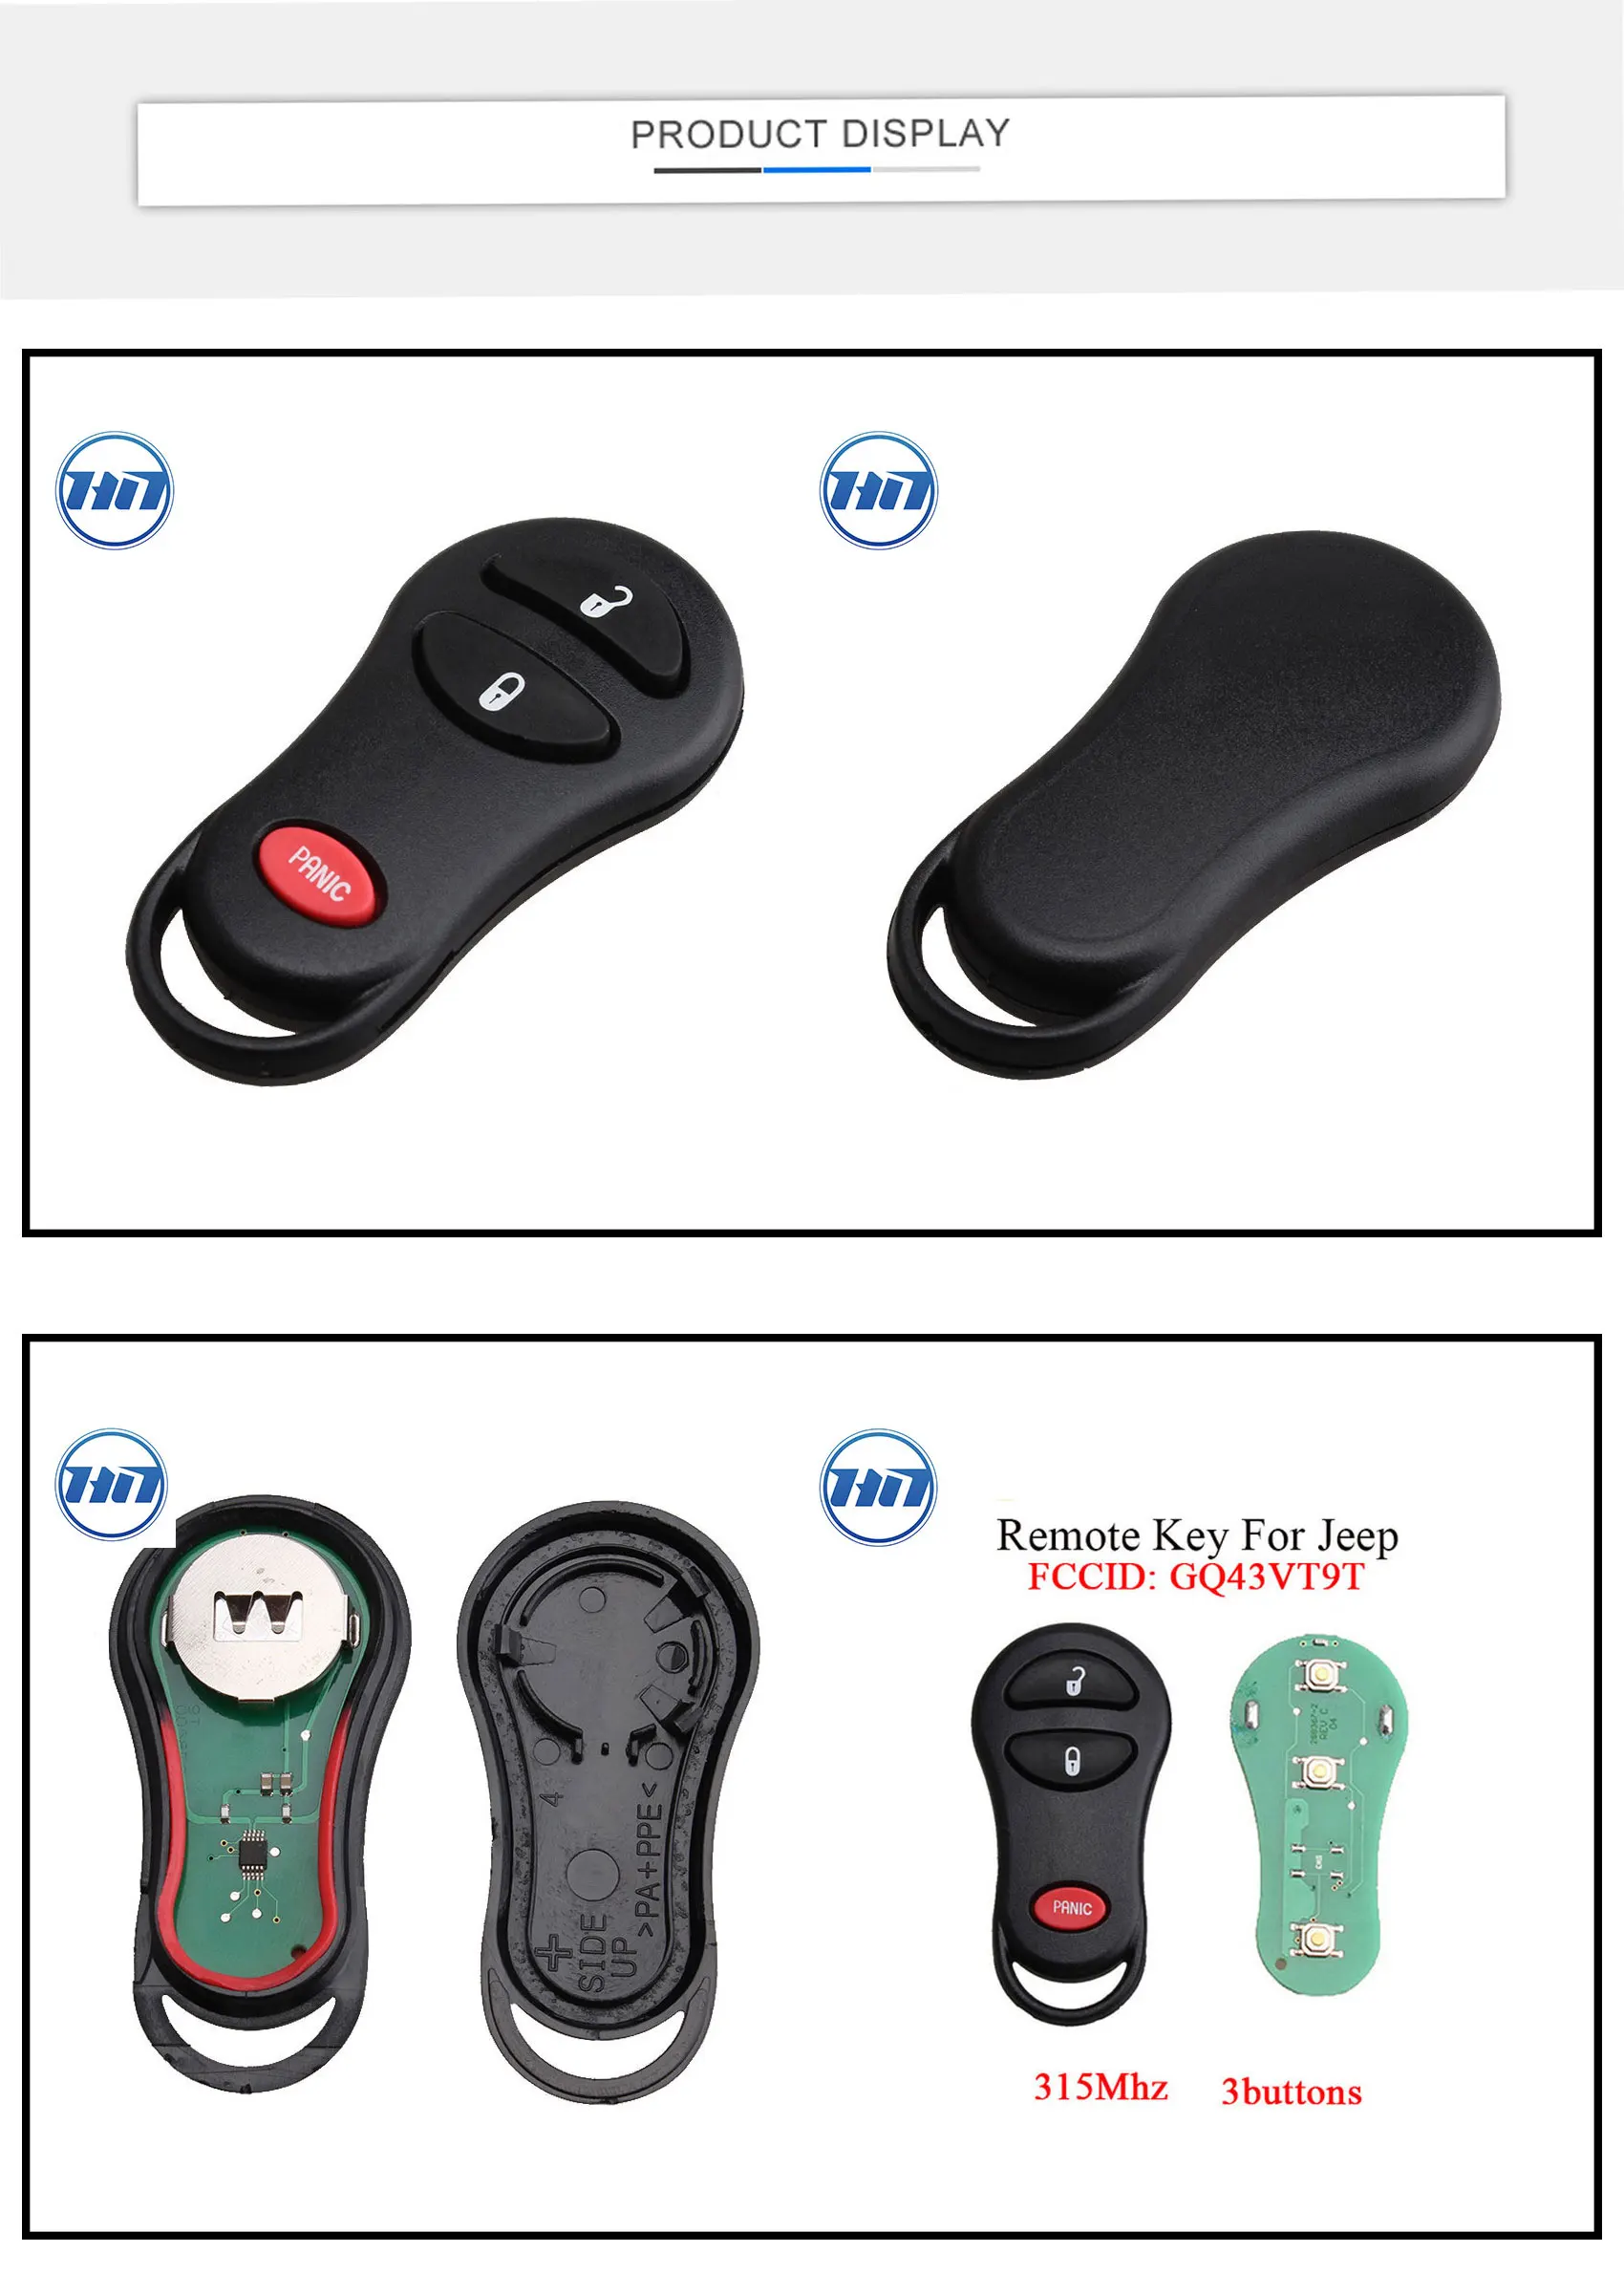 Excellent  315MHz 3 buttons Auto Control Car  Folding  Remote Entry FCCID GQ43VT9T Fit For Jeep Grand Cherokee 1998-2004